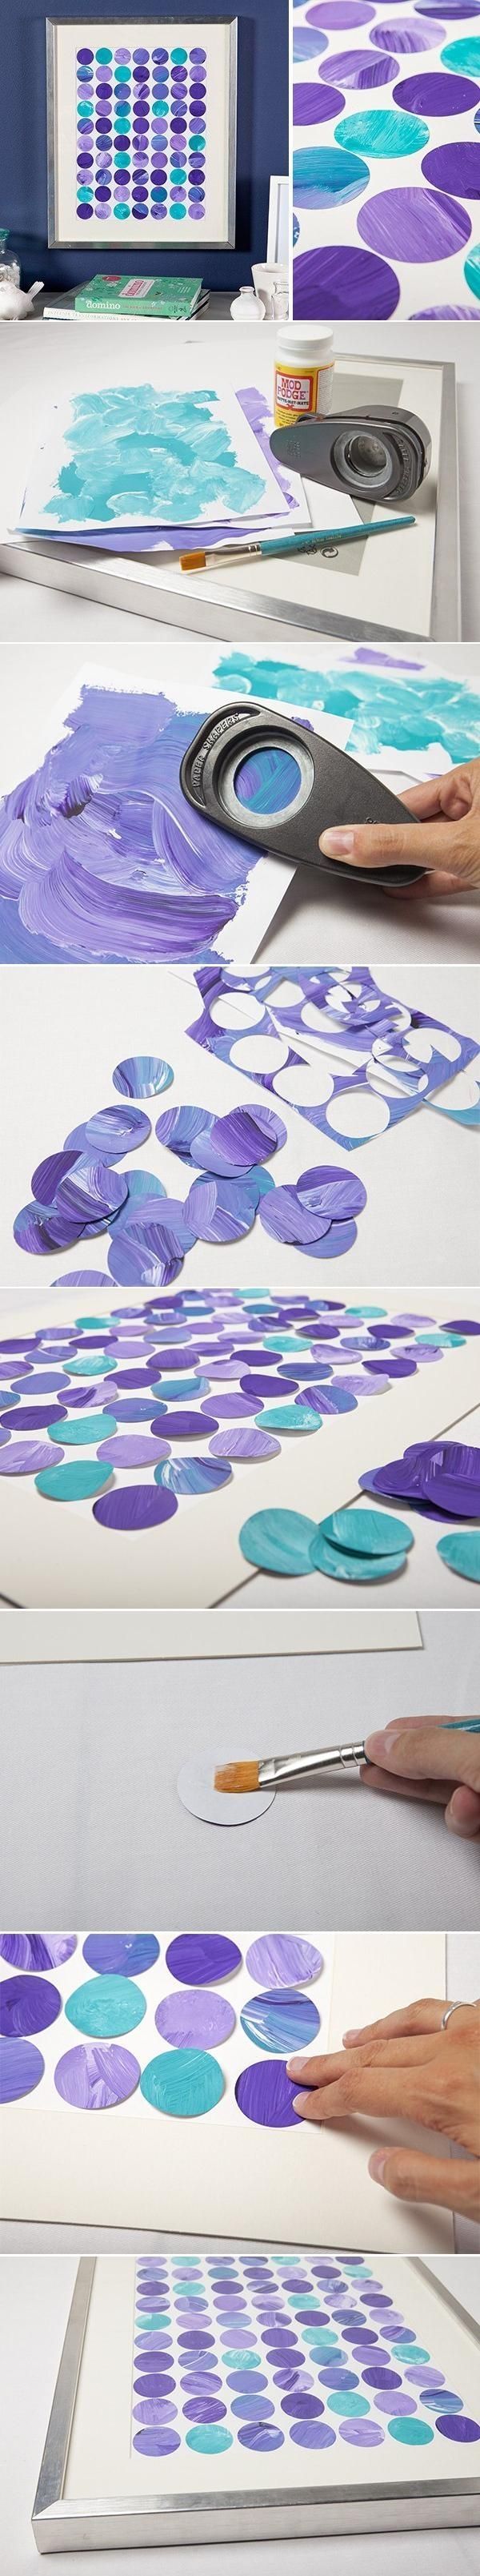 DIY Colorful Art – Would be